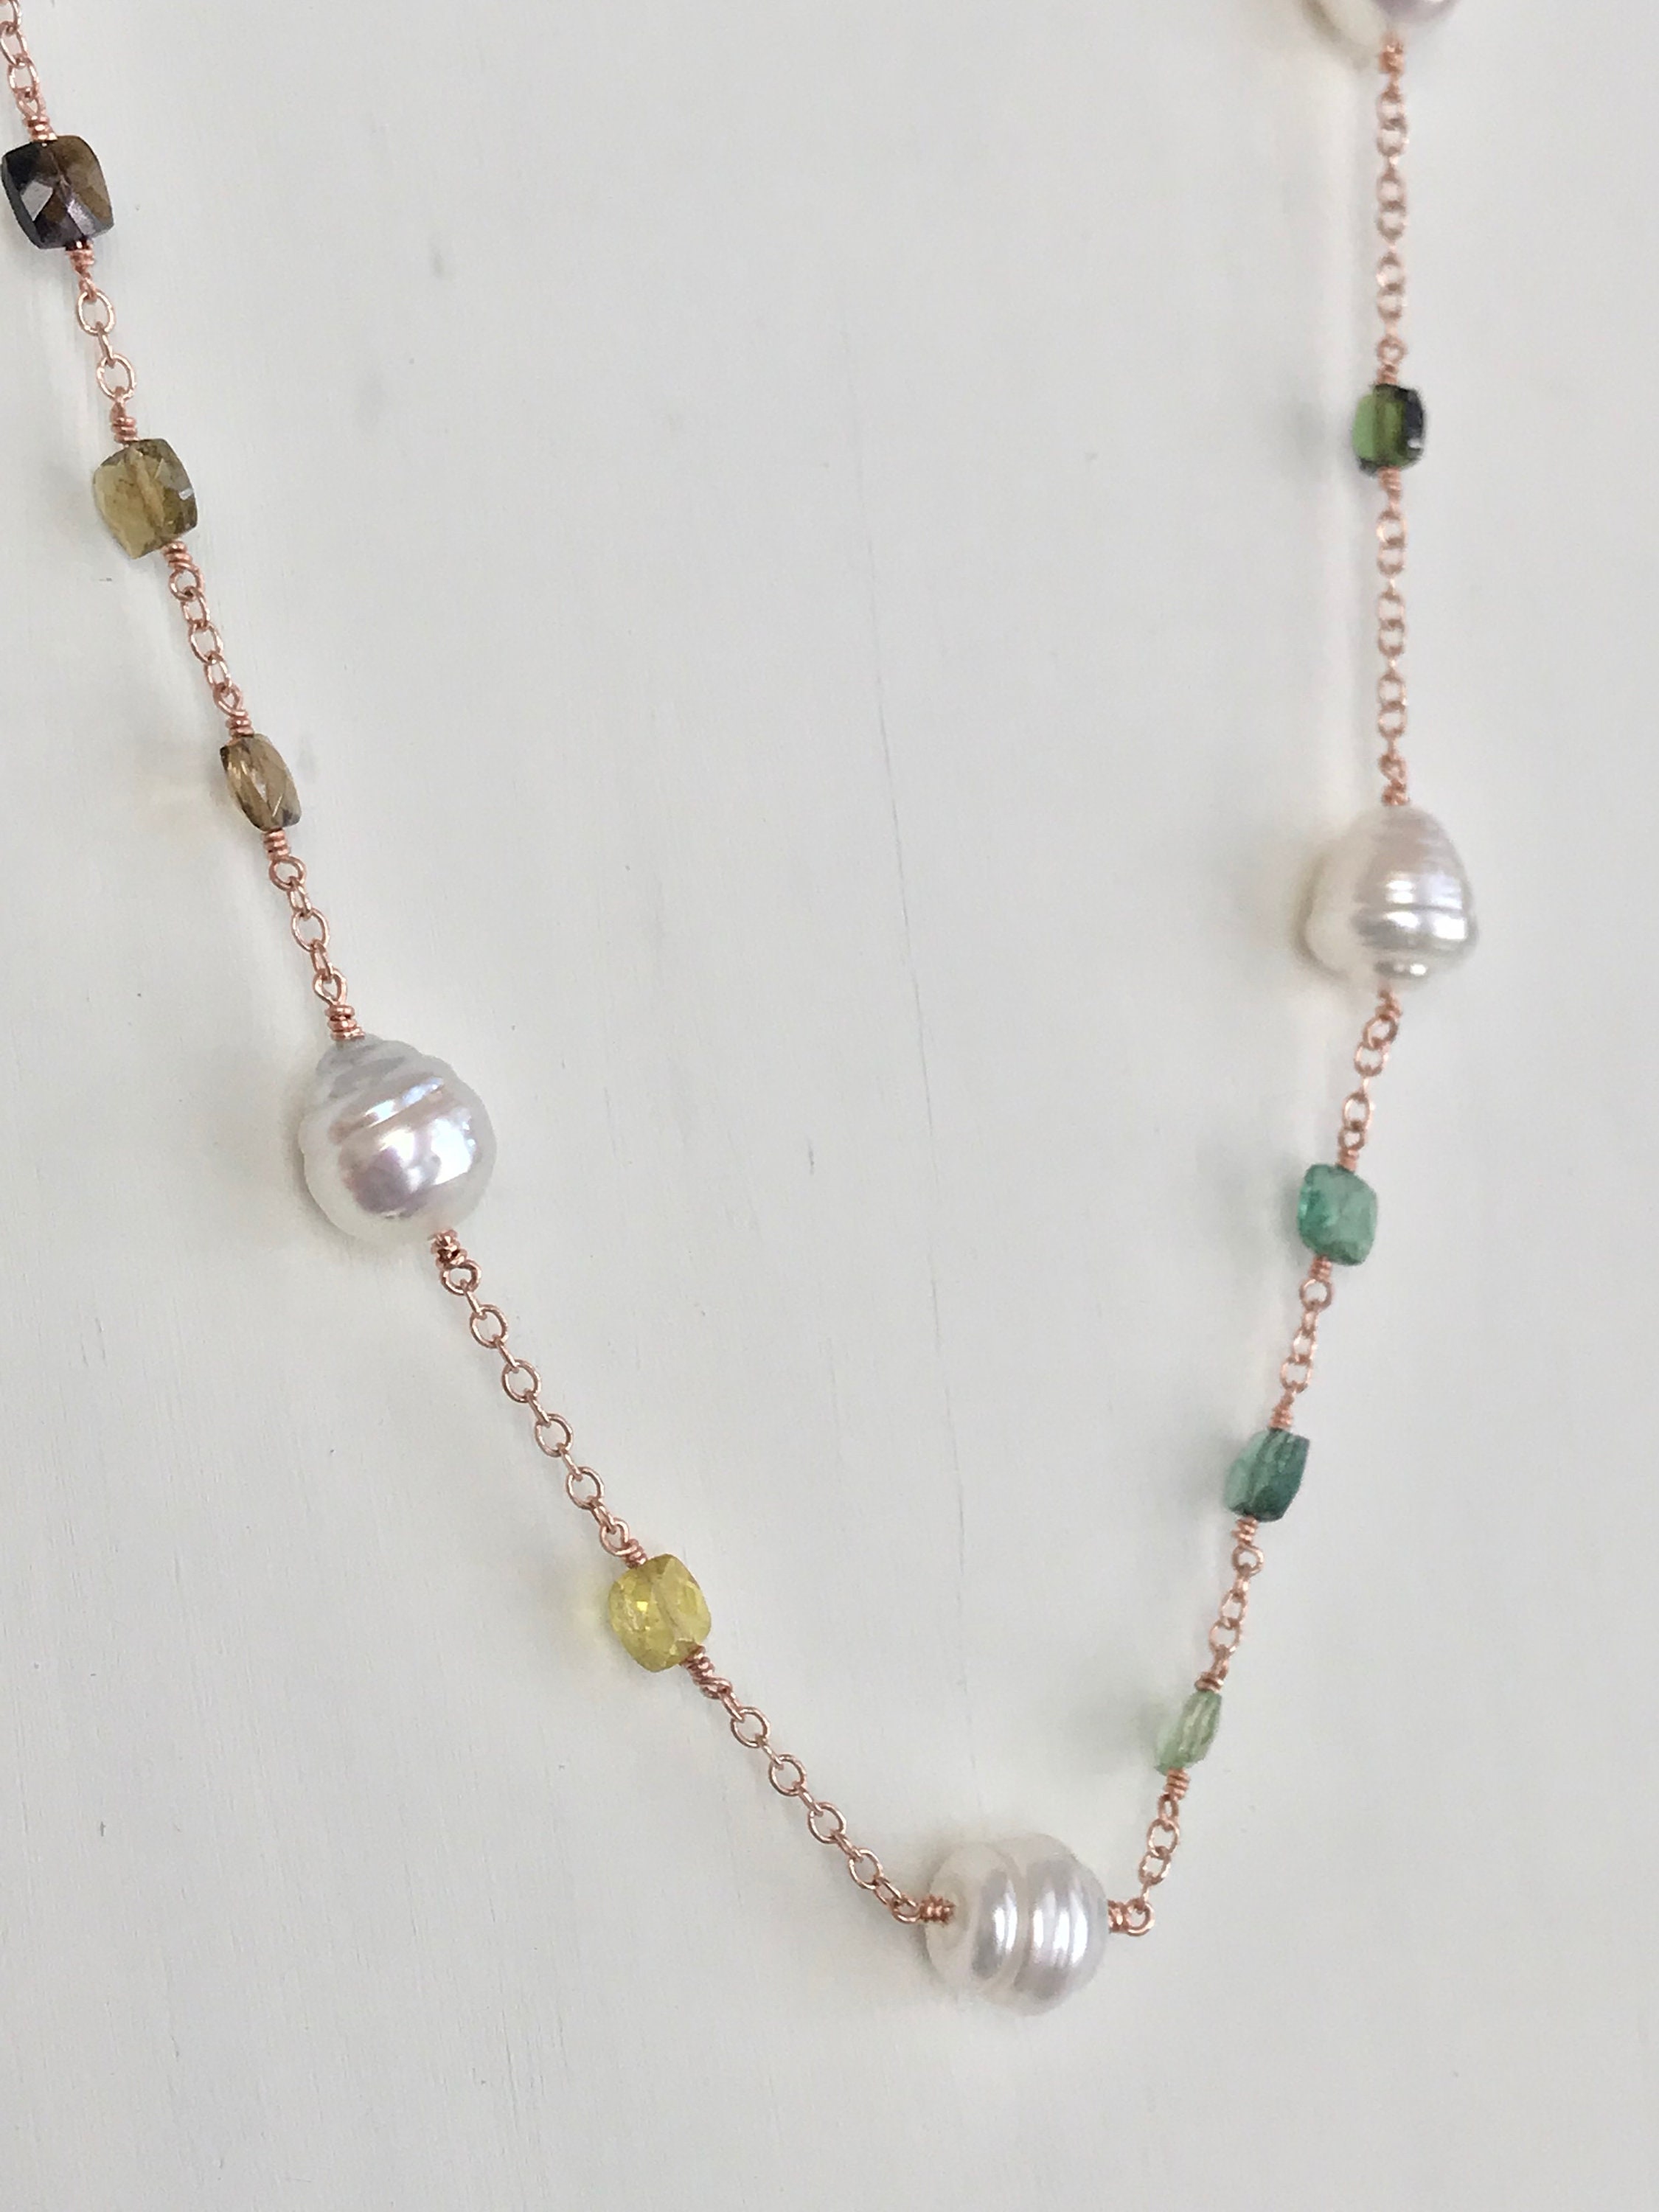 Cultured South Sea Circled Baroque Pearls, Multicolor Tourmaline, 14k ...